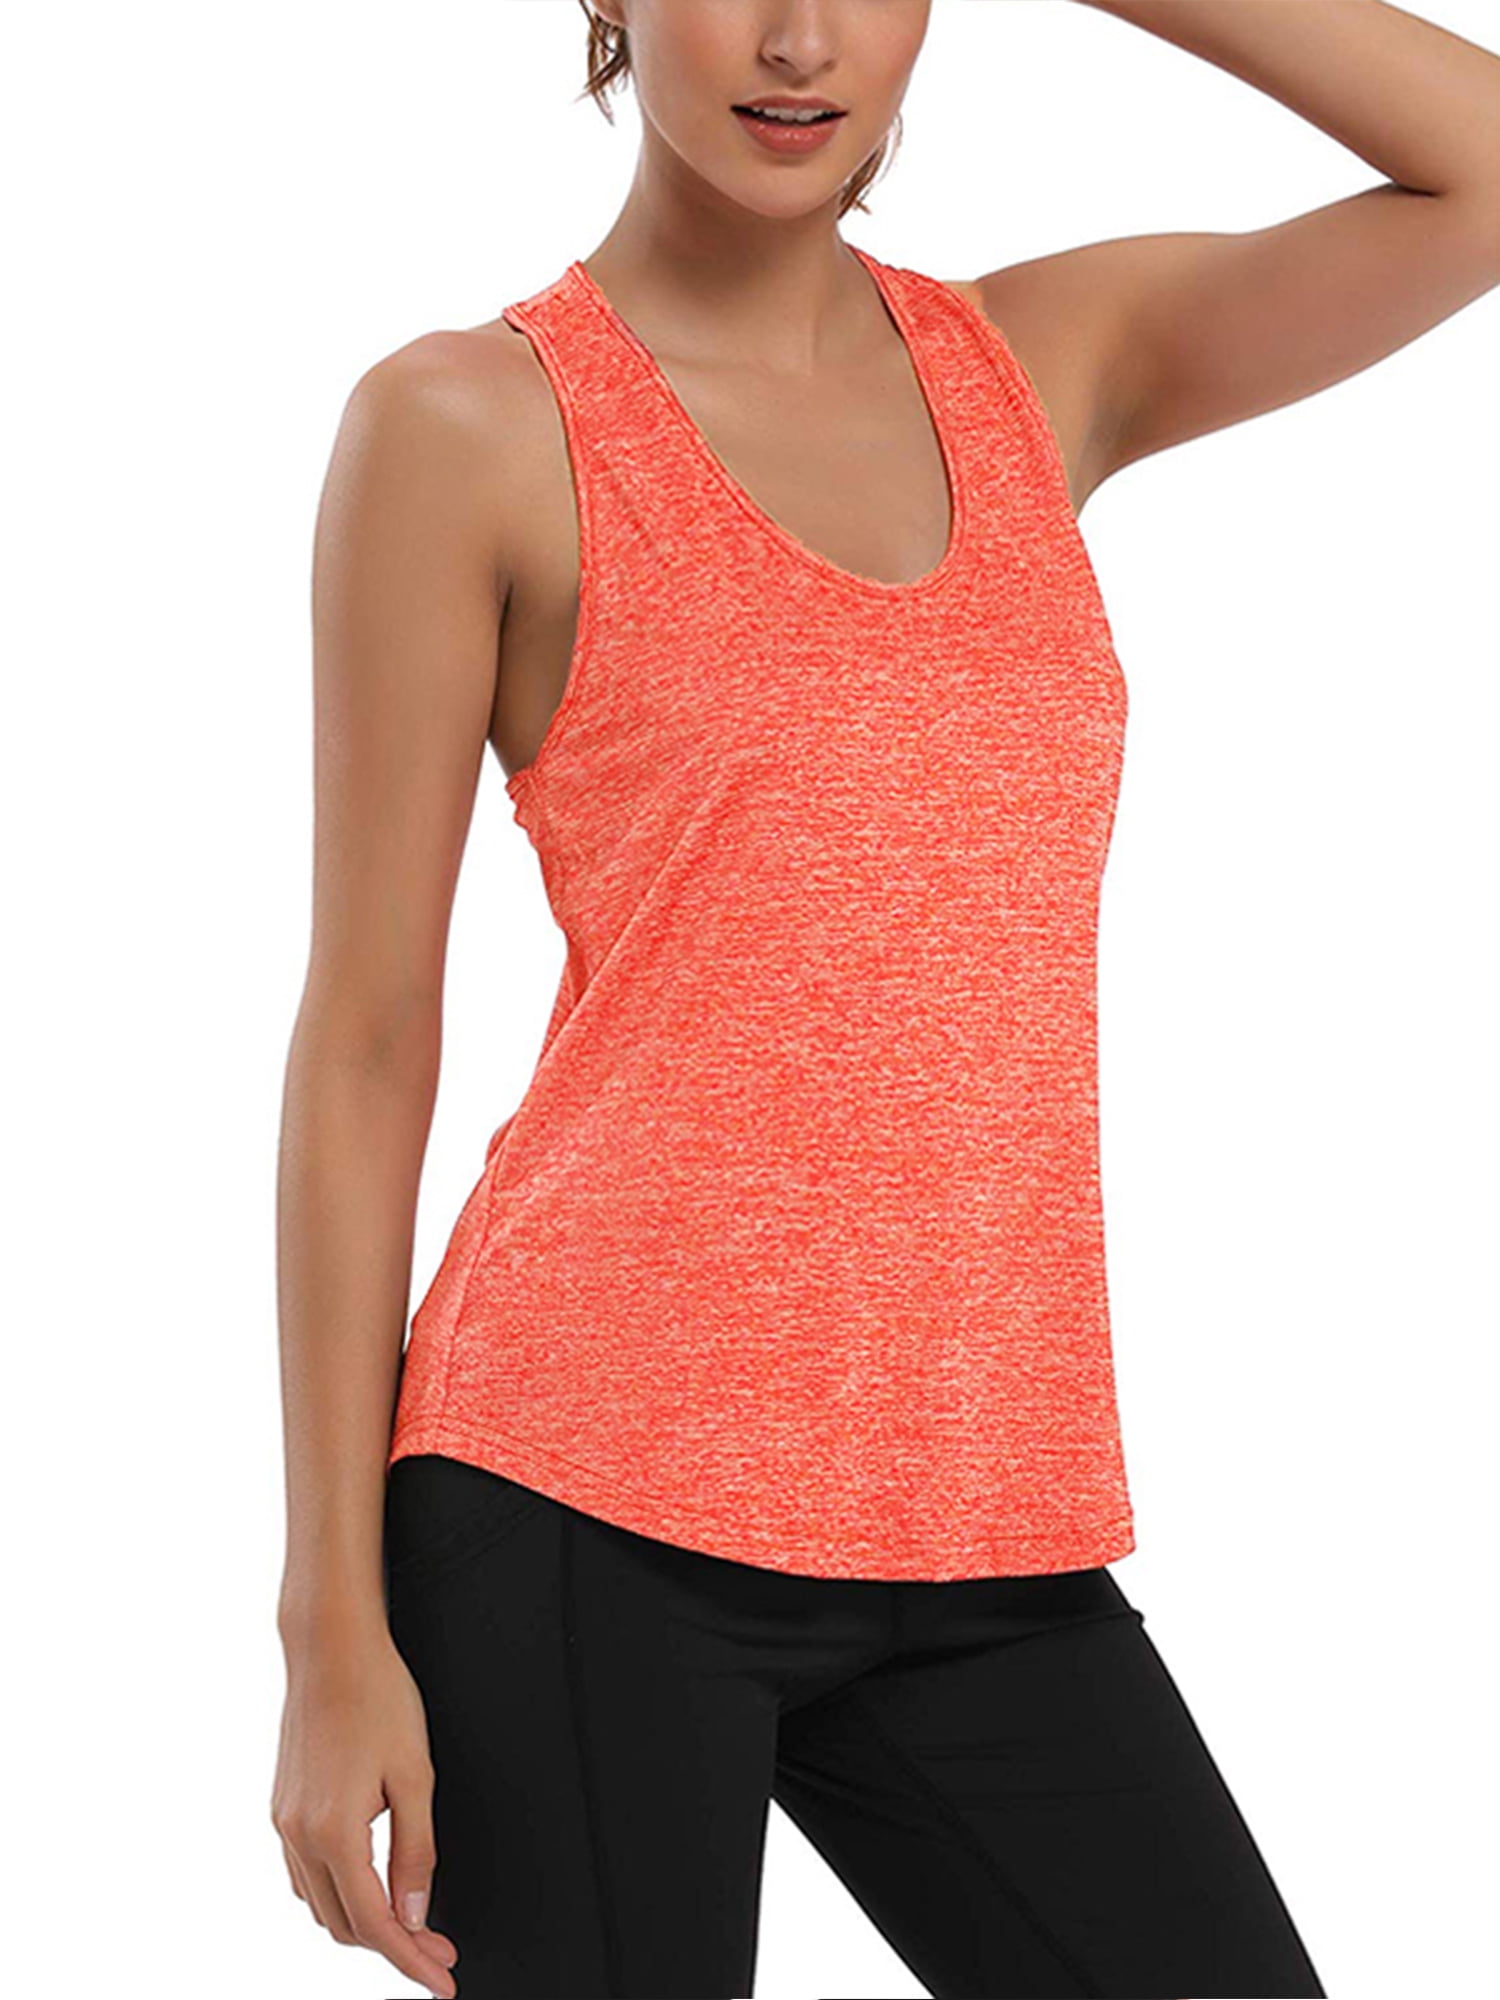 Women Yoga Activewear Tank Top Gym Fitness Workout Cross Vest Running Jogging Camisole Tops Sleeveless Tee Shirts Sports Back Slit